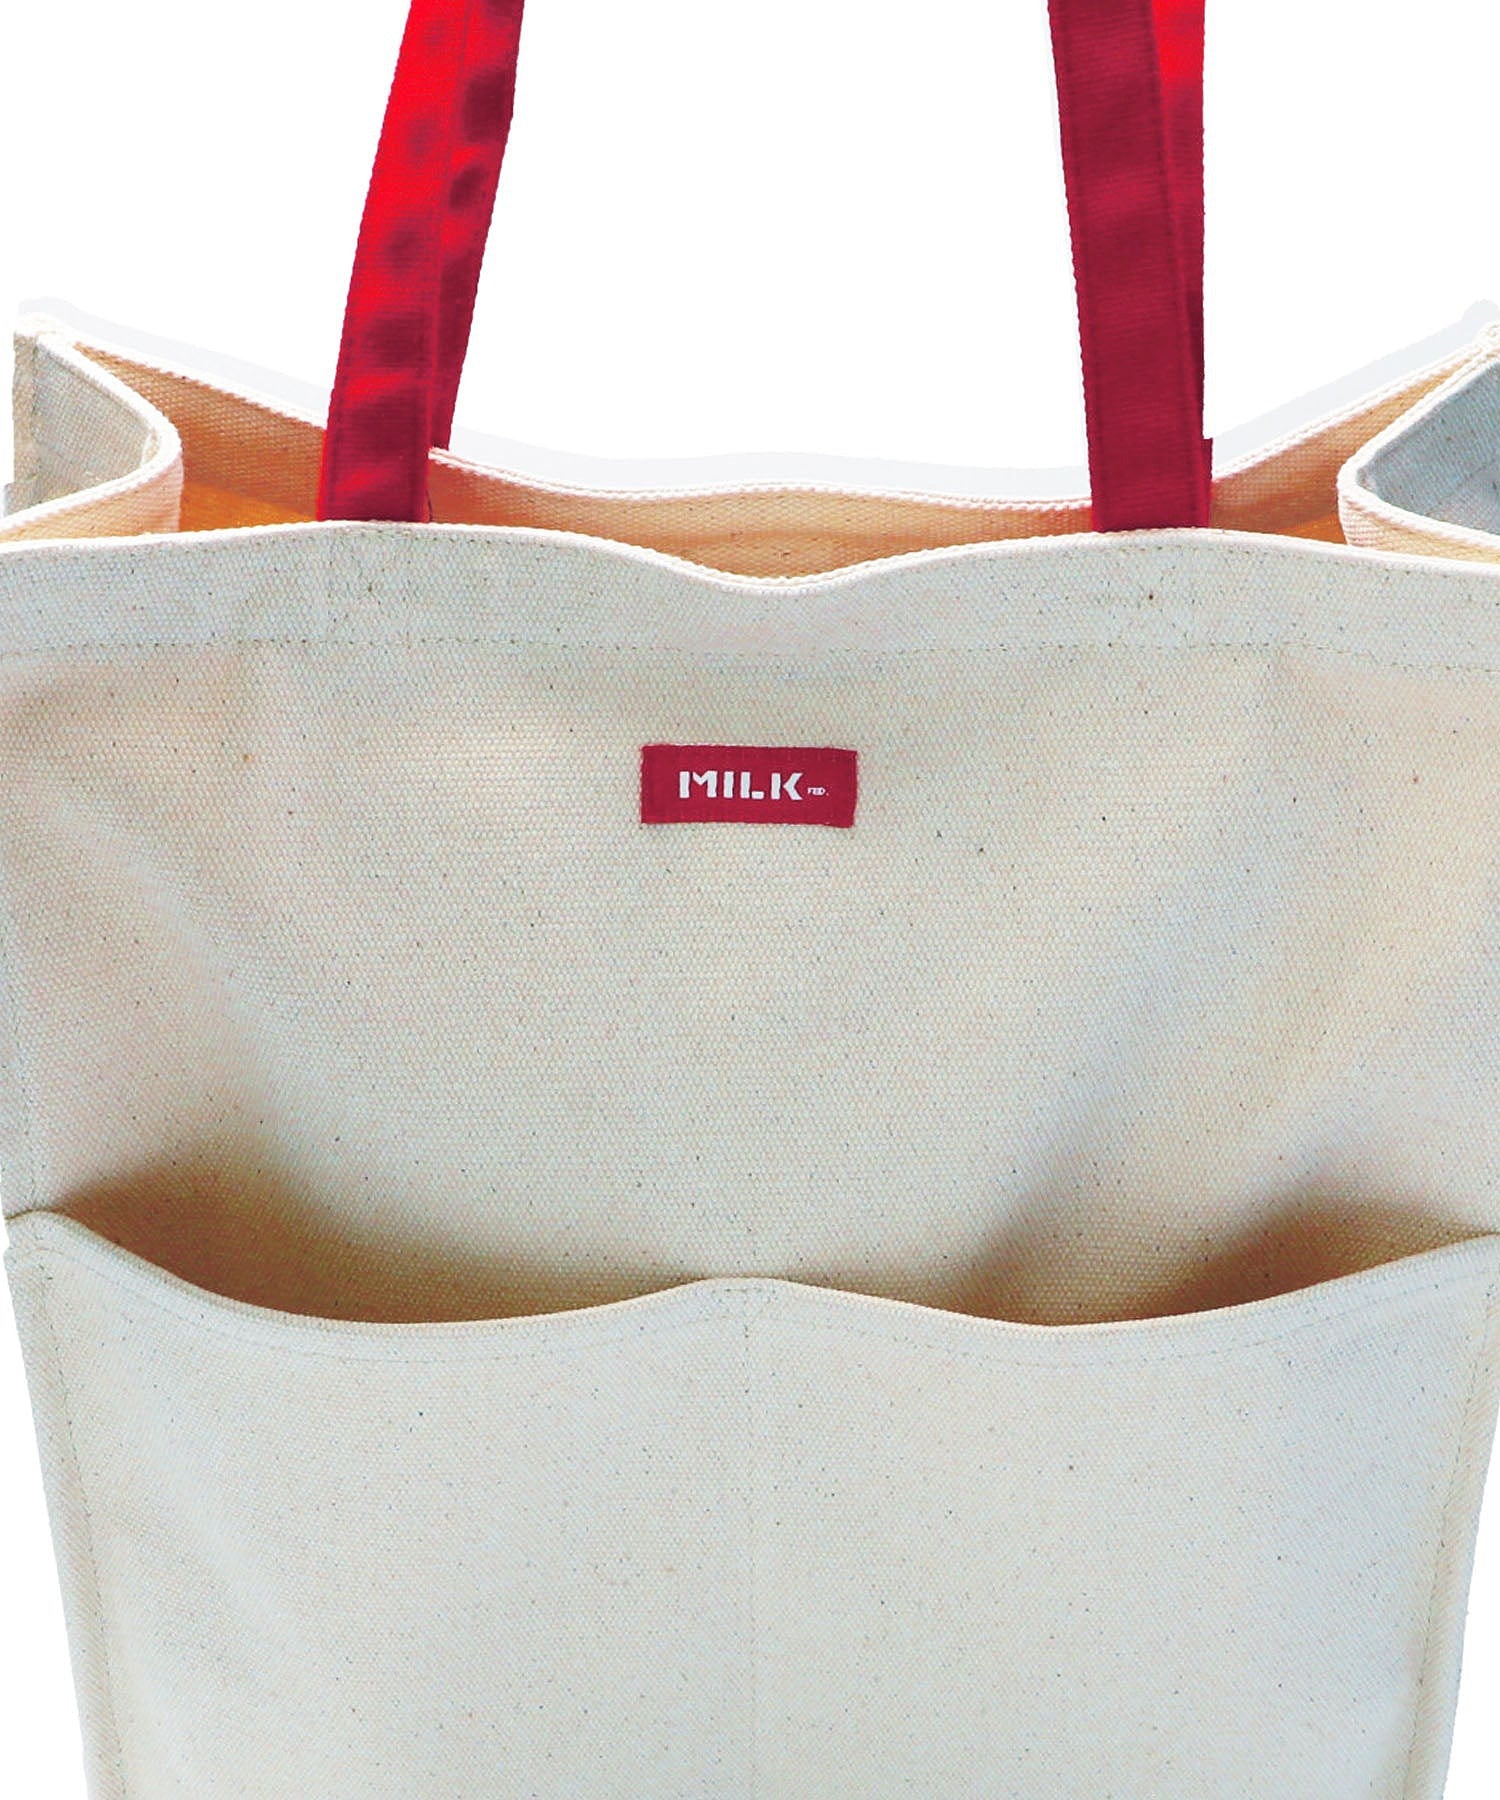 PATCHED COOPER LOGO TOTE MILKFED.